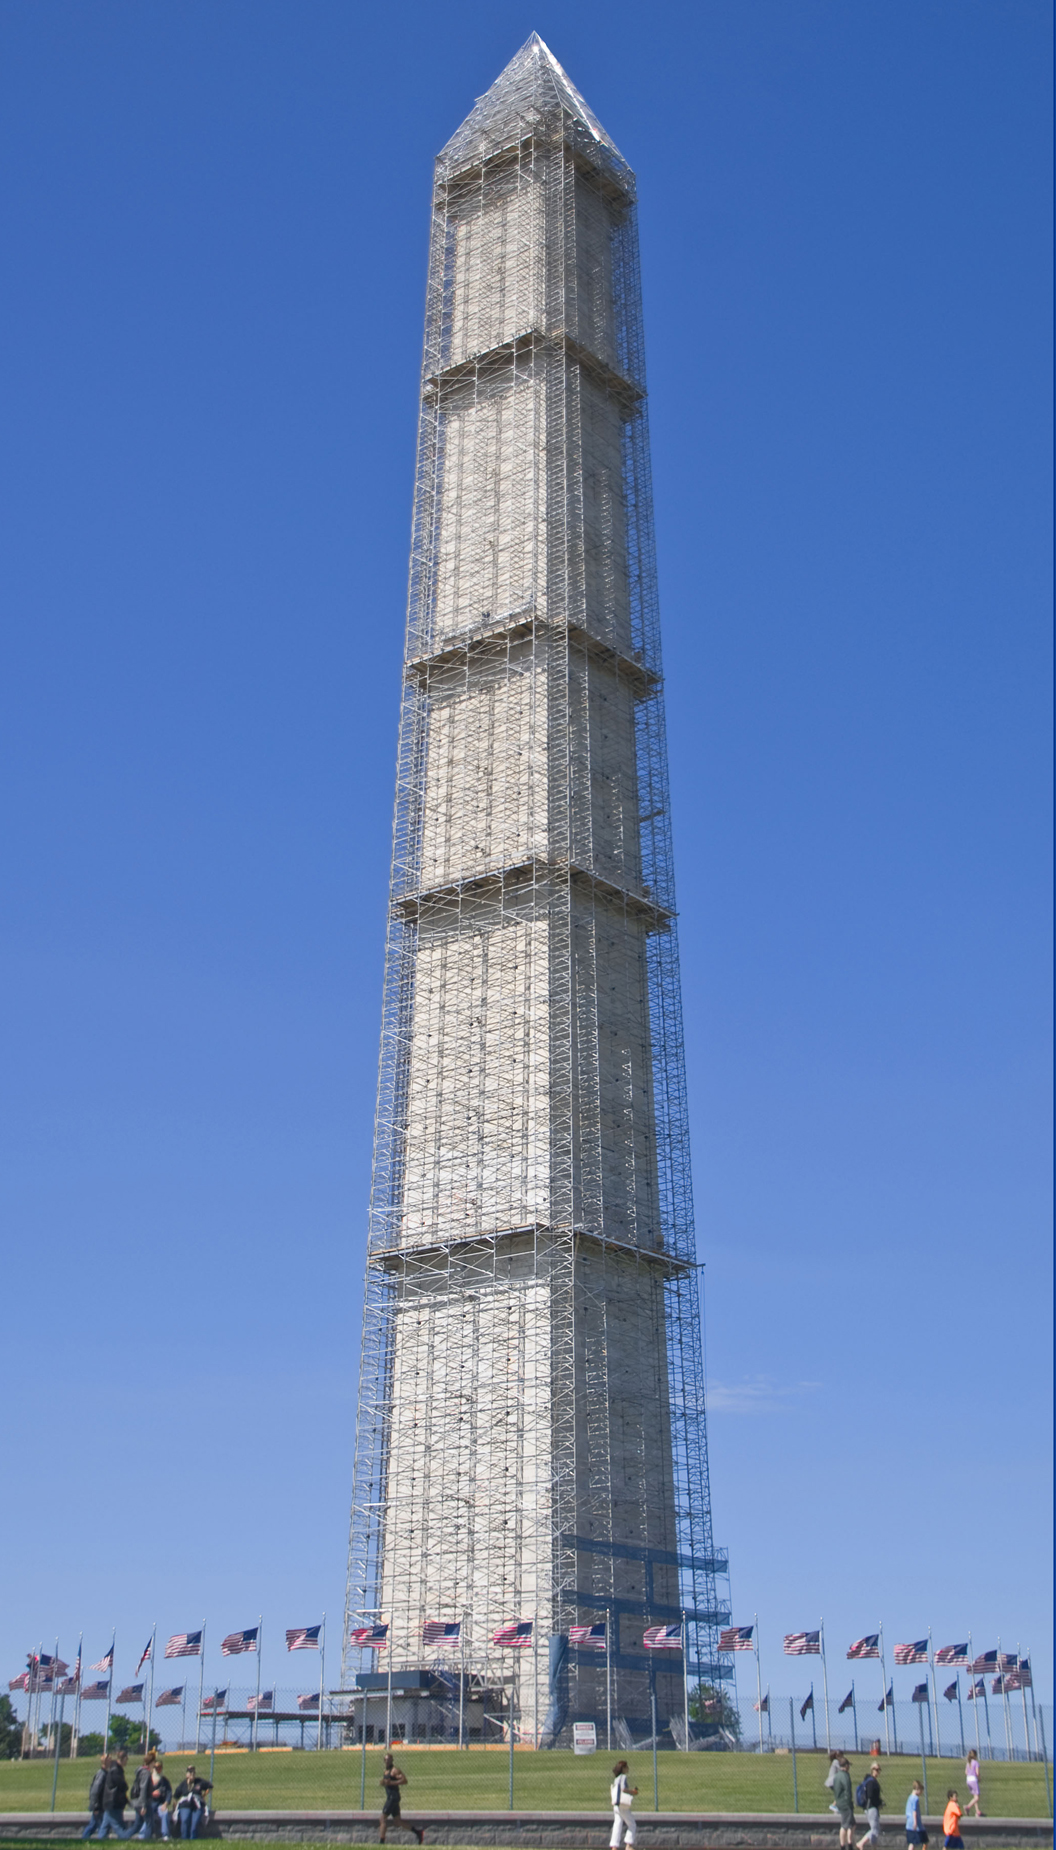 Washington Monument covered in scaffolding